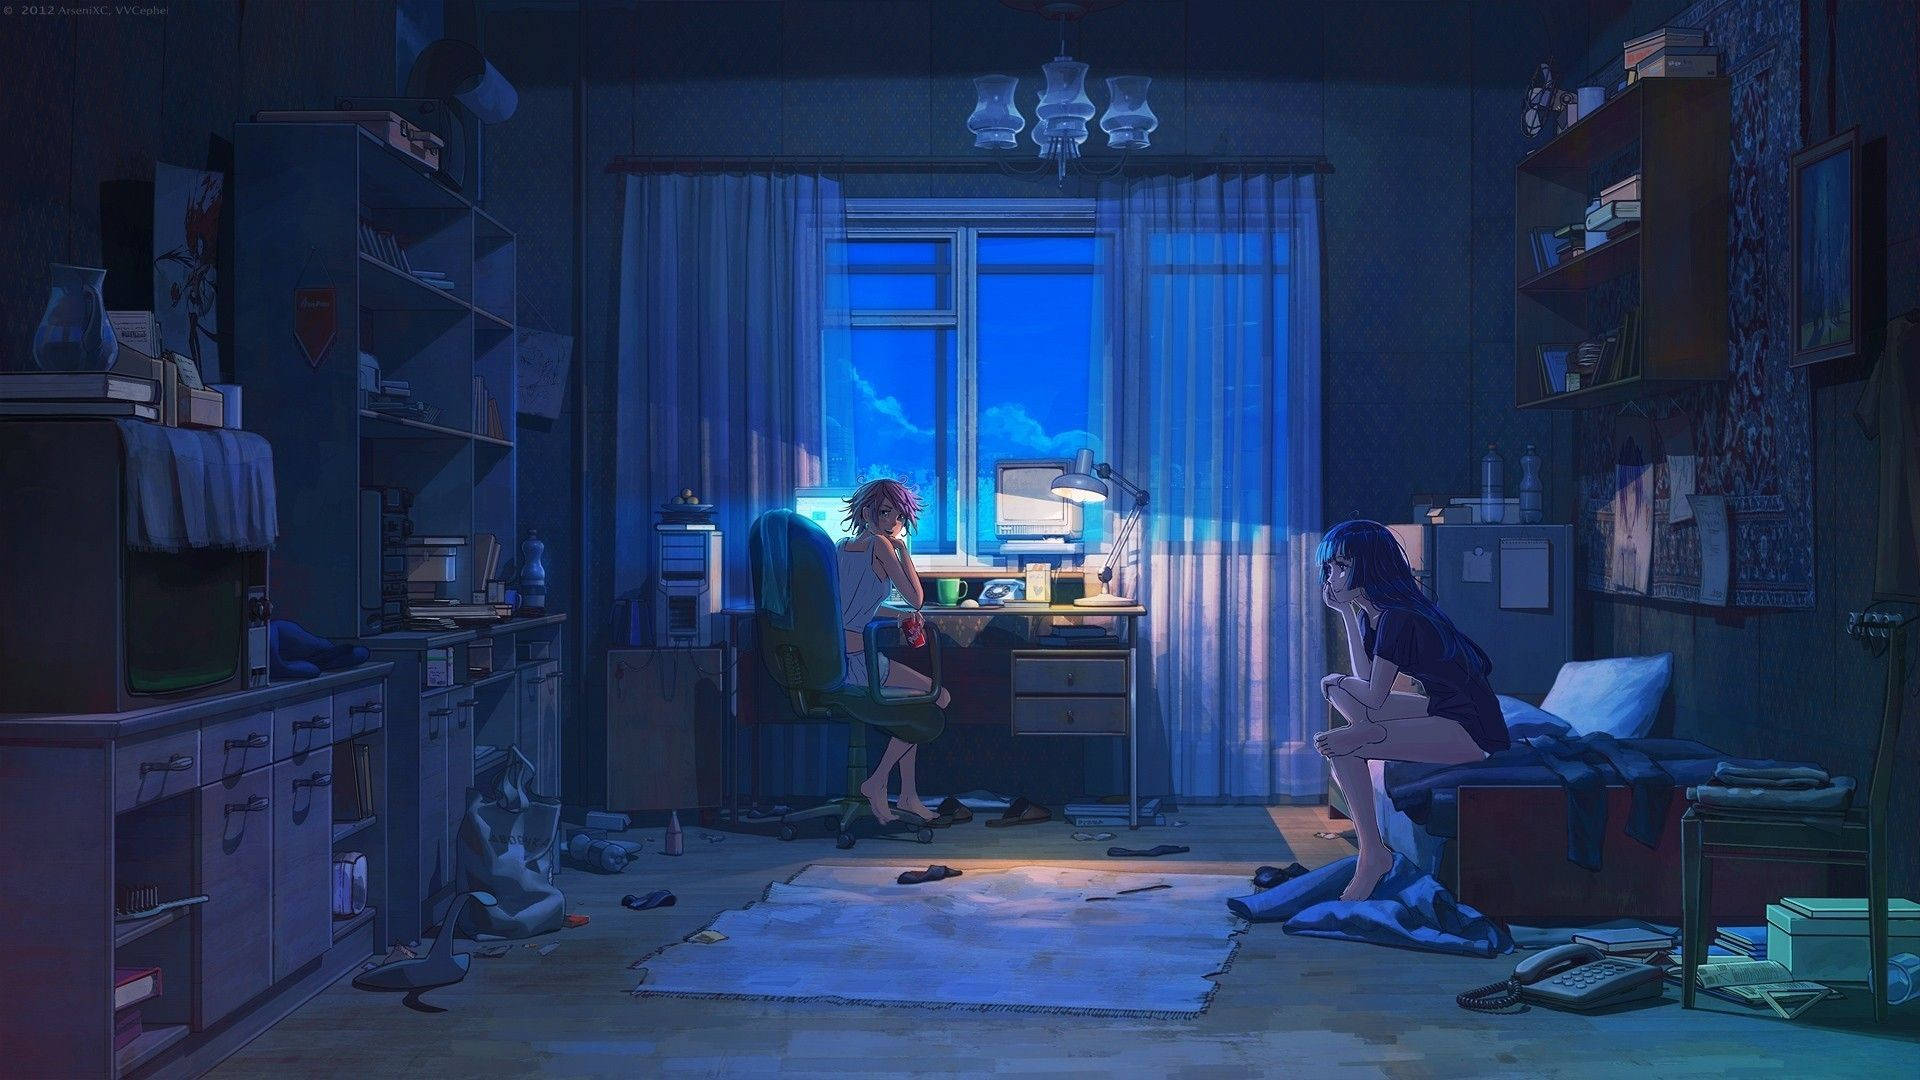 A Room With Two People Sitting In It Wallpaper